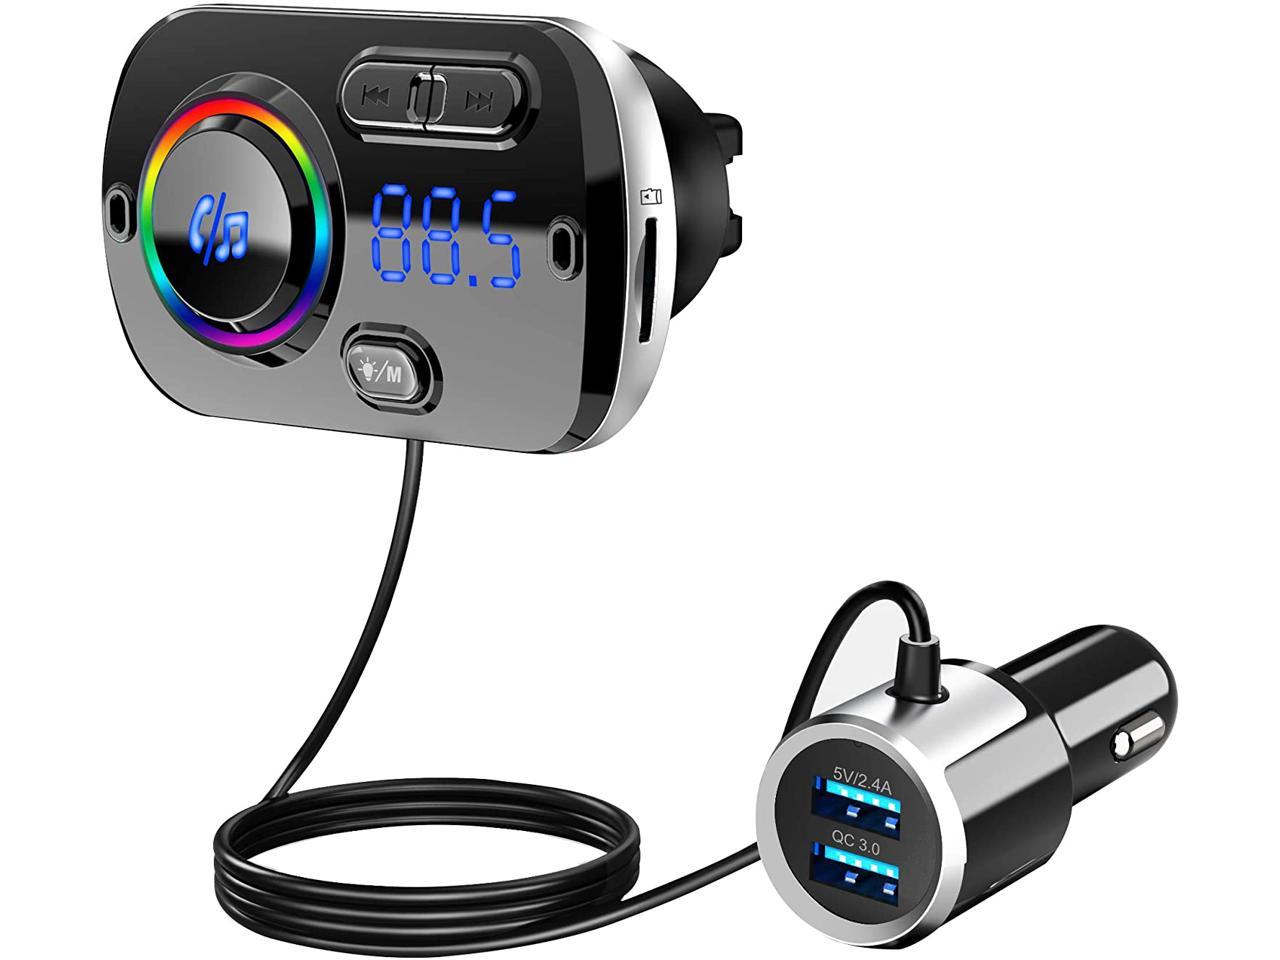 Bluetooth 5.0 Car FM Transmitter,QC3.0 Wireless Bluetooth Car Adapter,Mp3 Music Player Radio Transmitter for Car with Hands-Free Calling and 2 USB Charge,LED Backlit,Support TF Card/USB Drive 